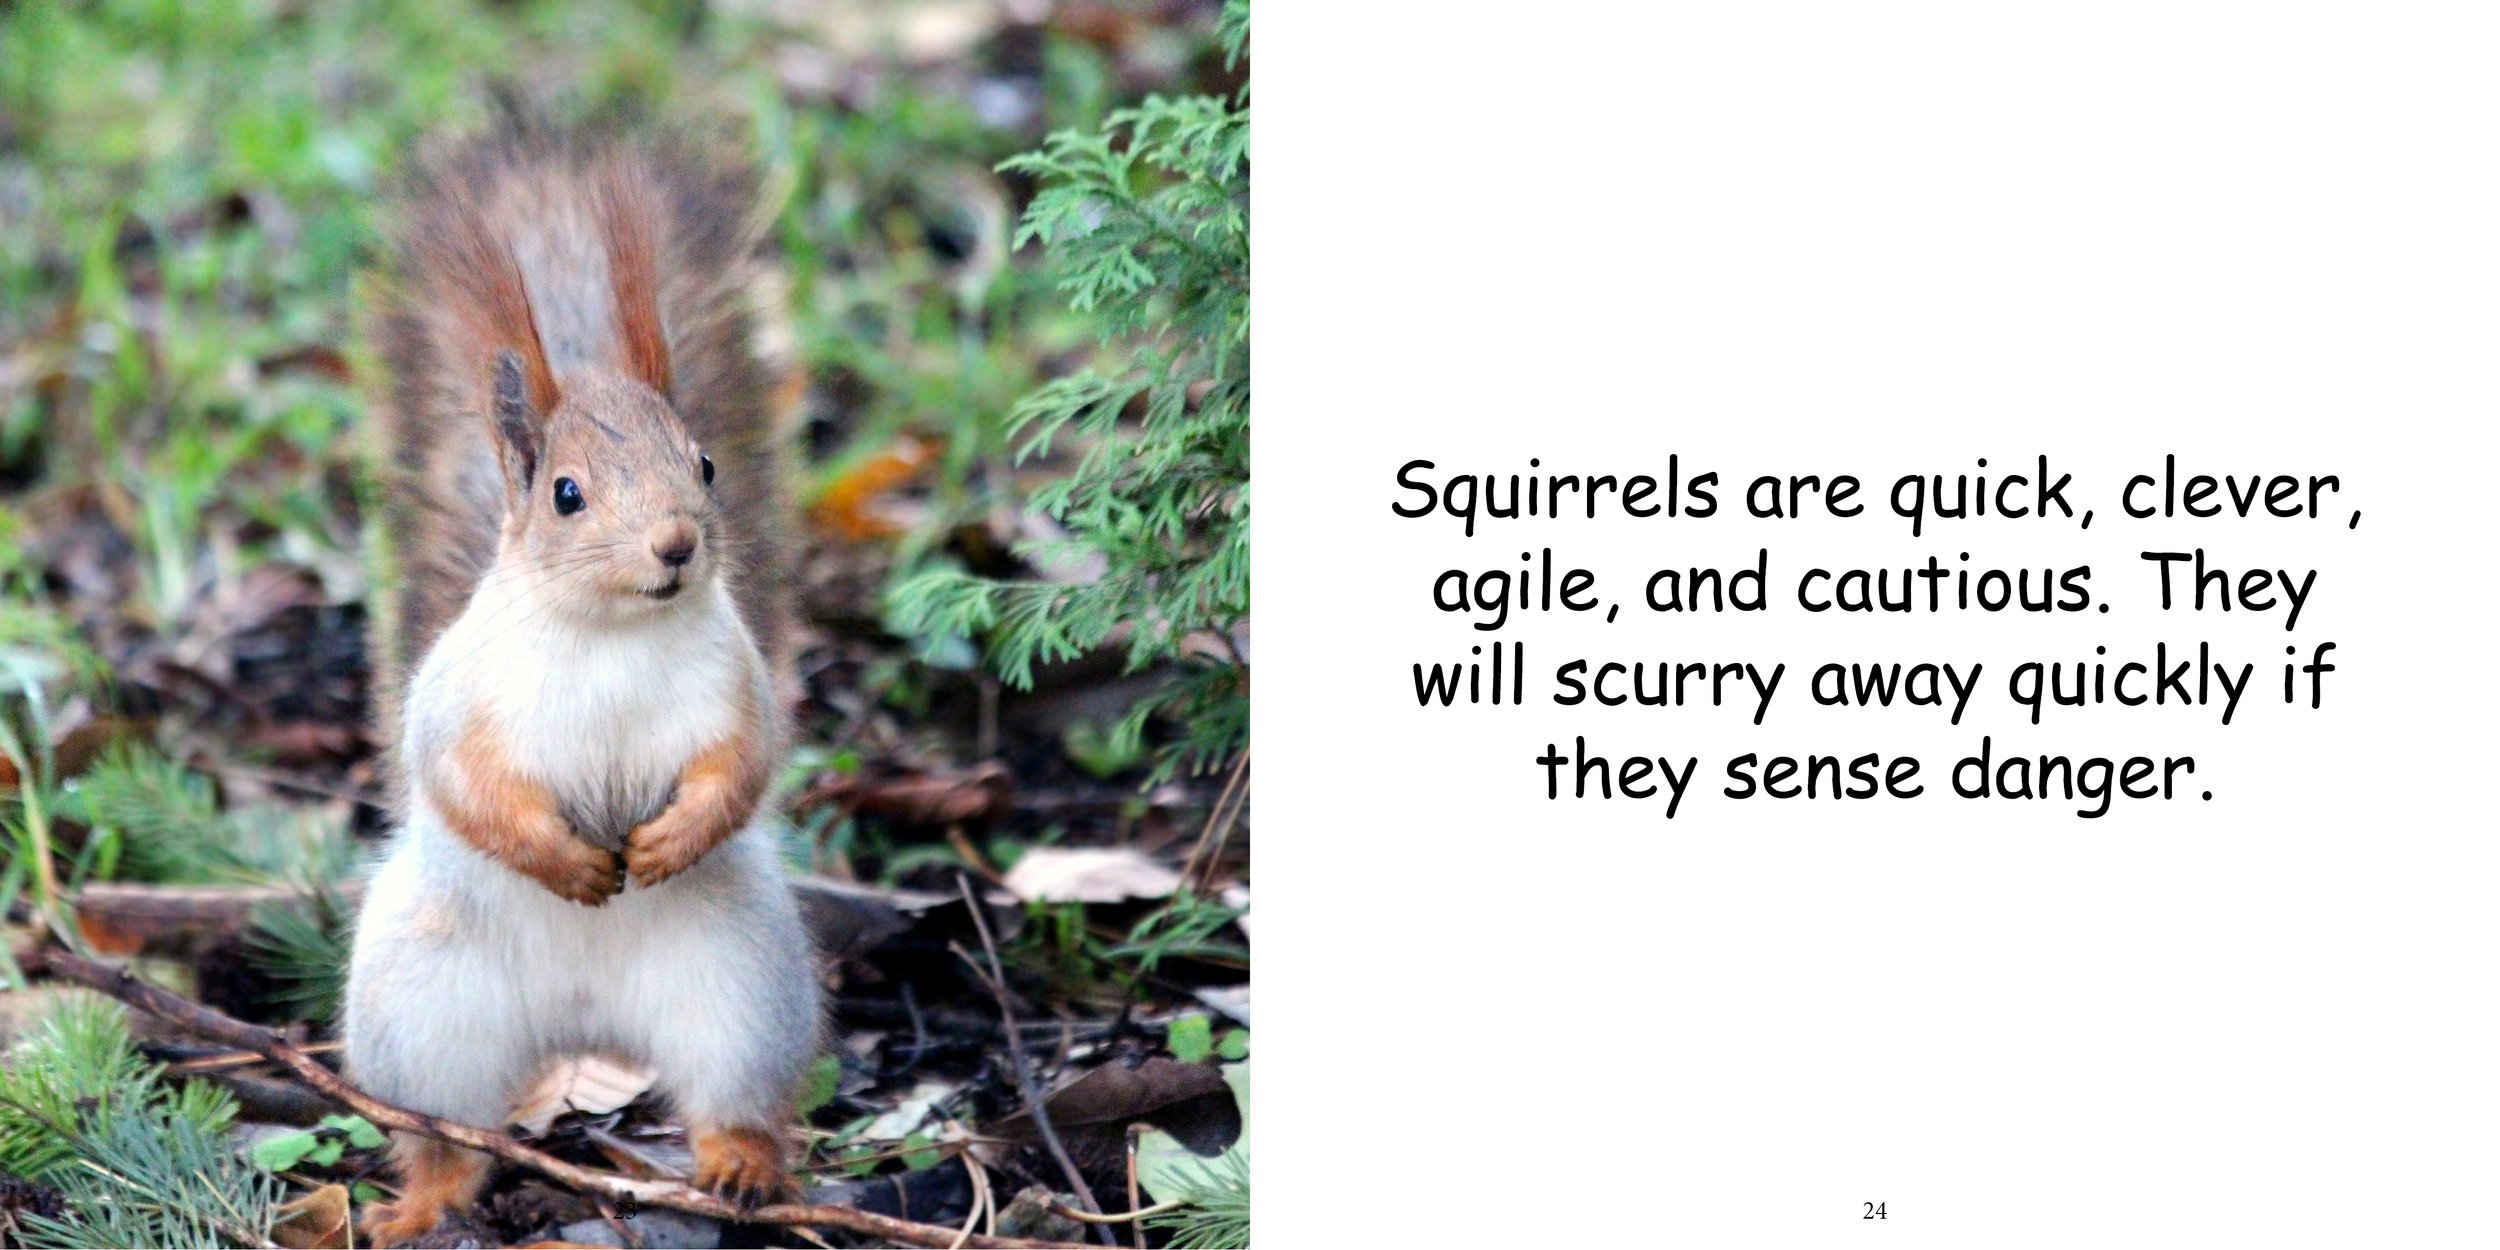 Everything about Squirrels16.jpg